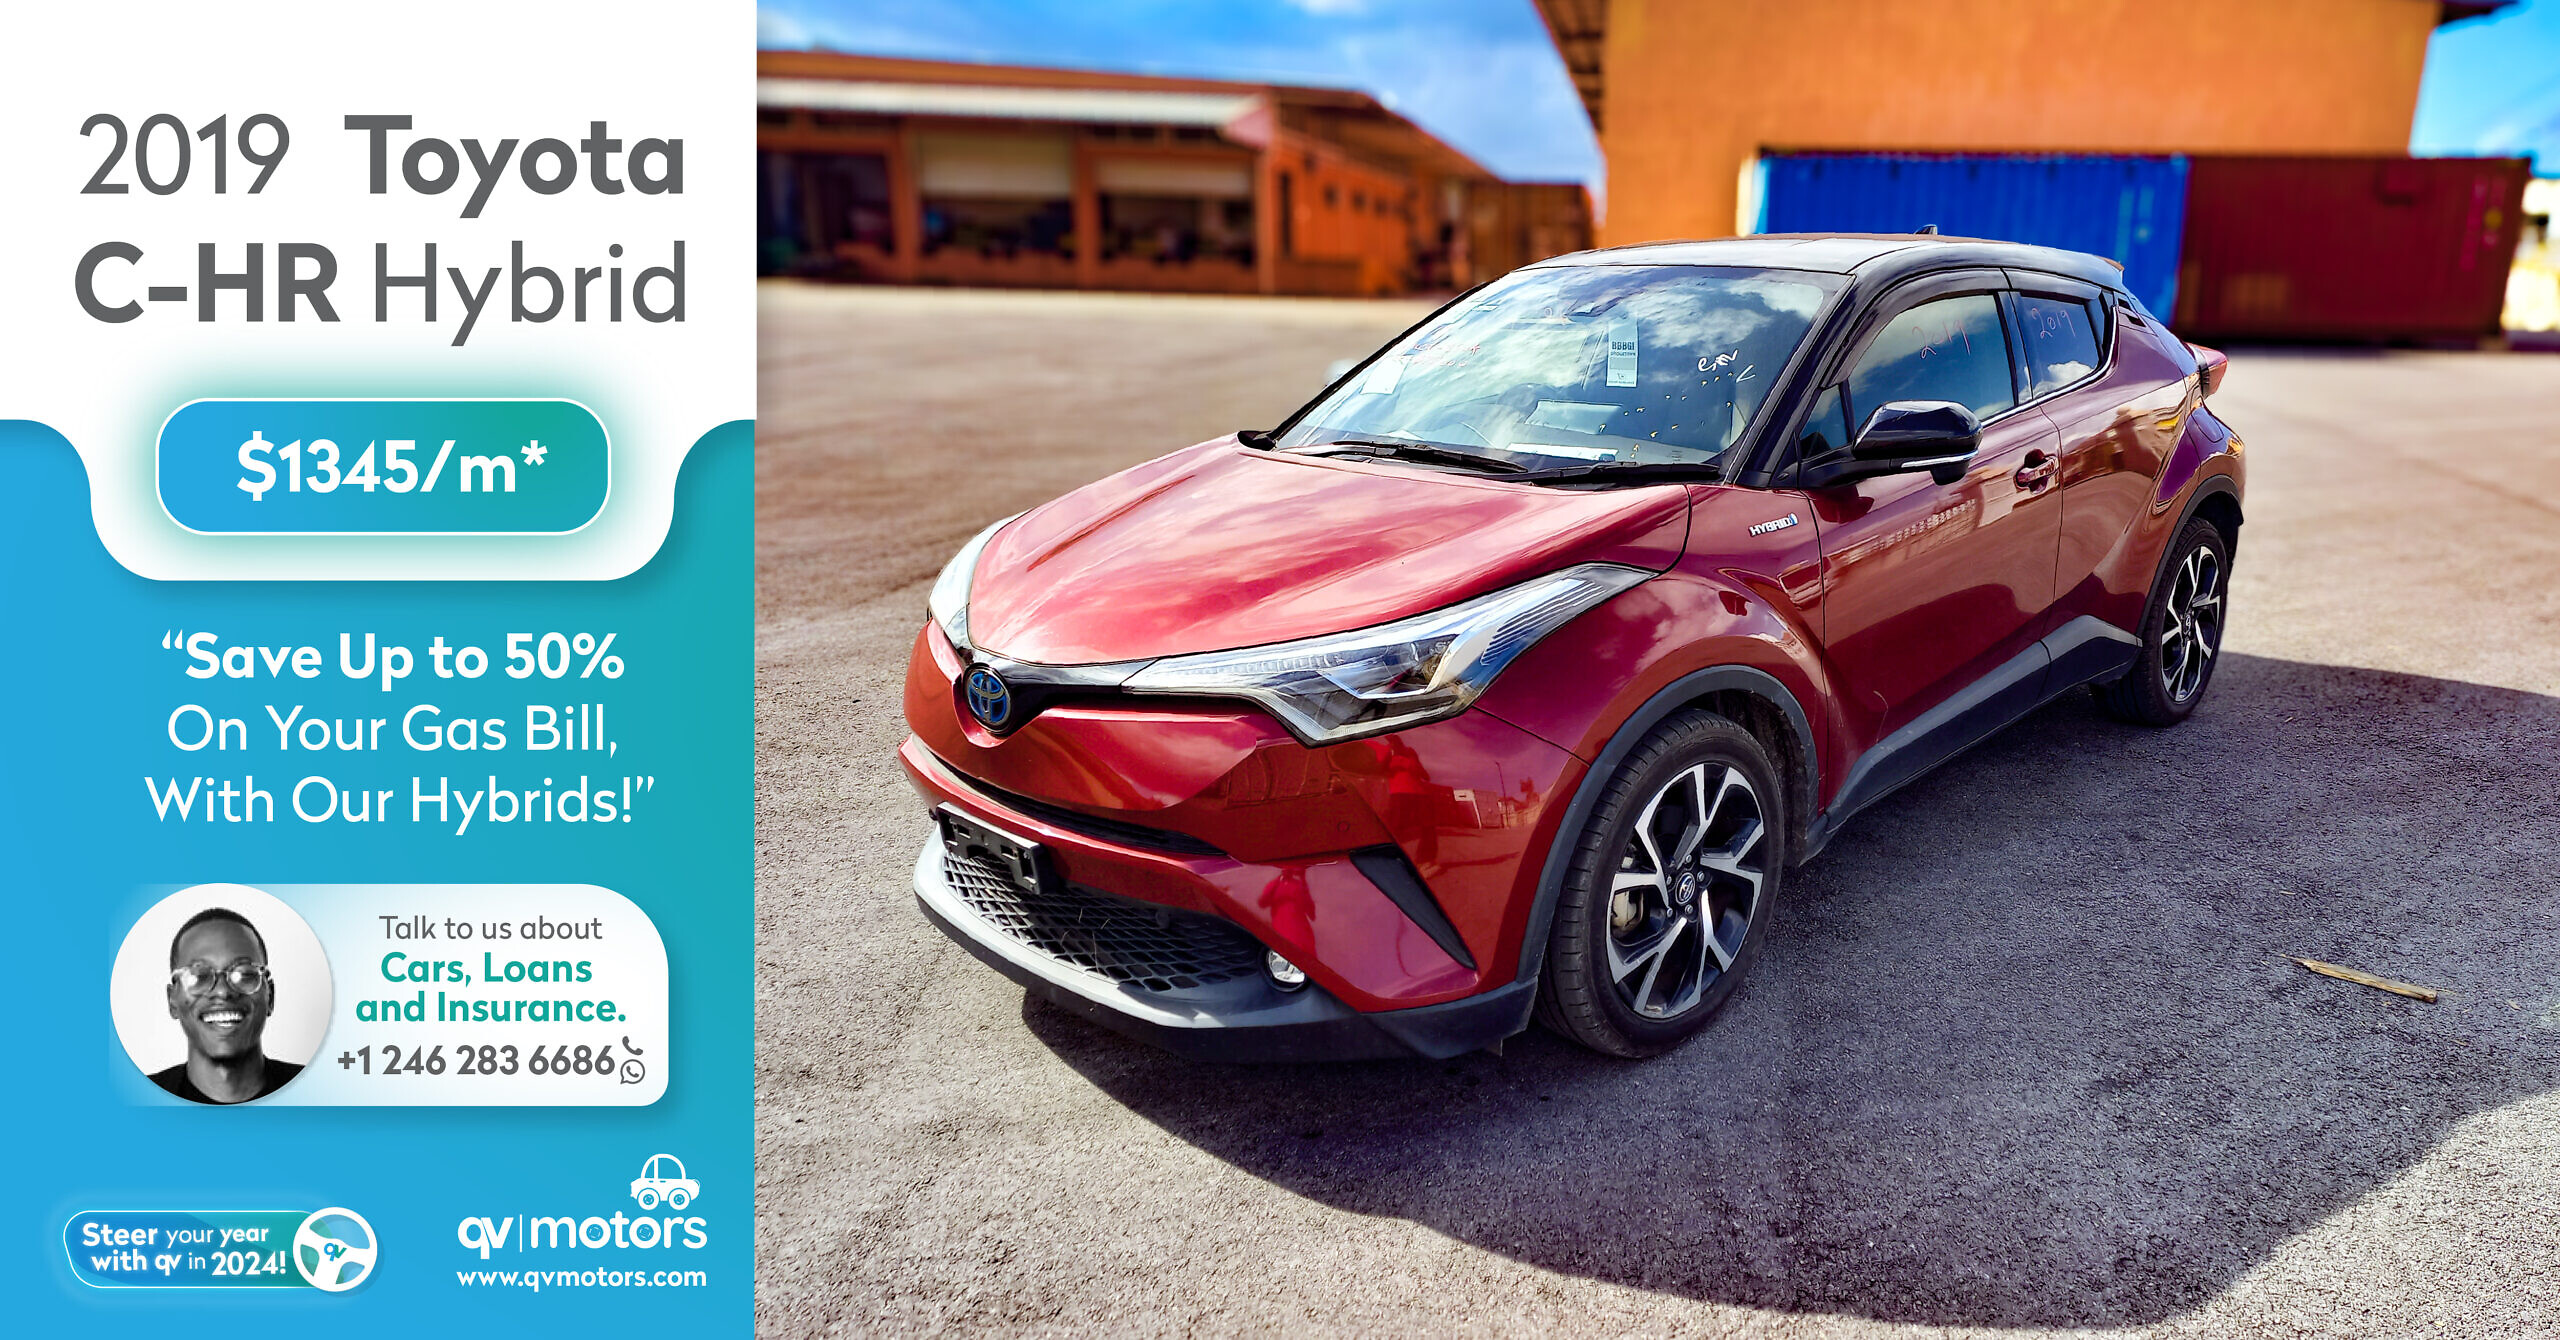 2019 Toyota C-HR Hybrid – Save up to 50% on gas!